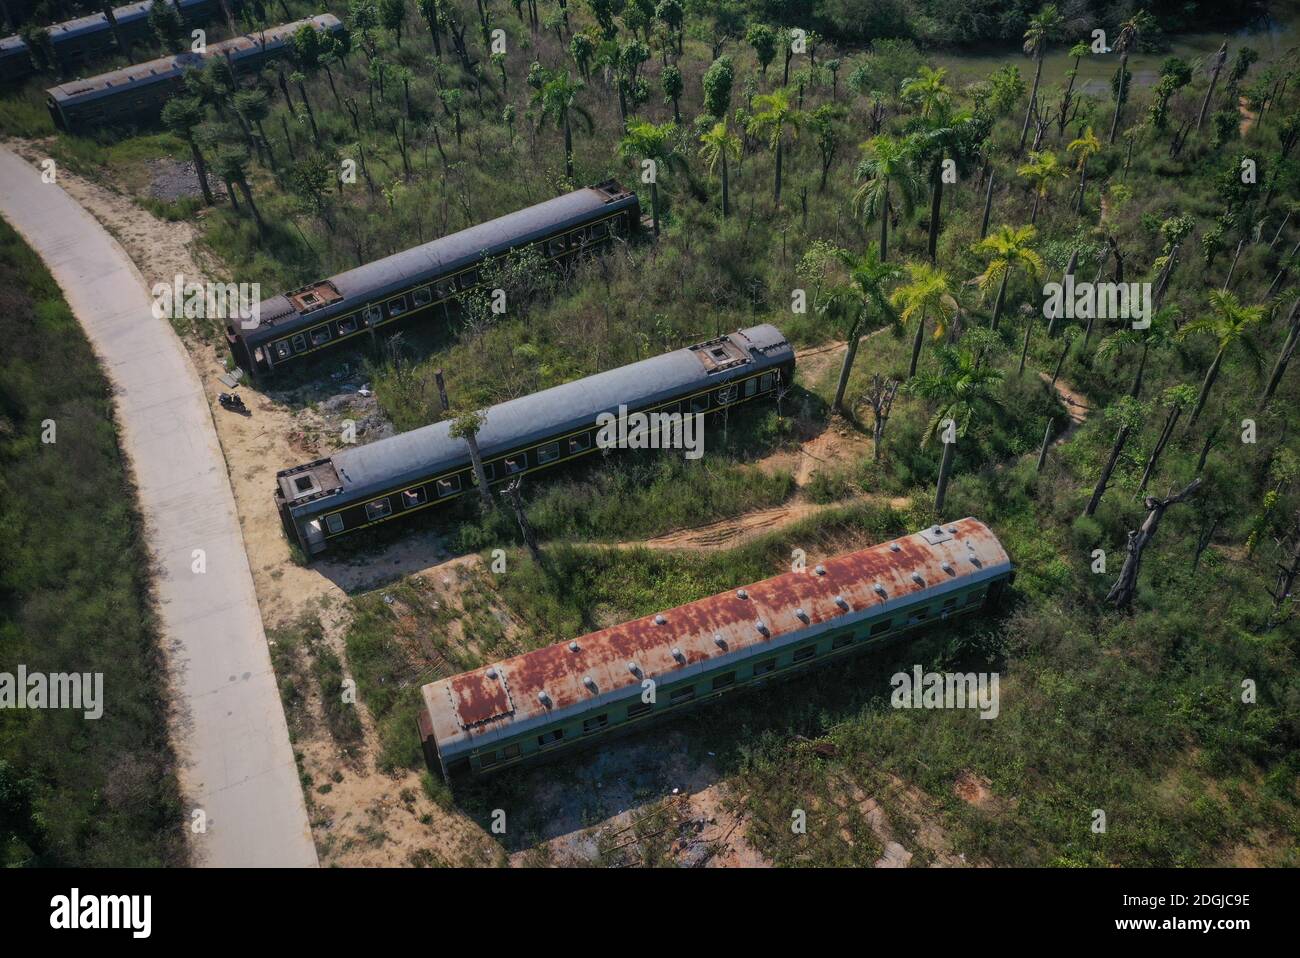 https://c8.alamy.com/comp/2DGJC9E/there-are-piles-of-abandoned-green-skinned-trains-on-the-train-graveyard-which-has-a-special-beauty-in-nanning-city-south-central-chinas-guangxi-pr-2DGJC9E.jpg